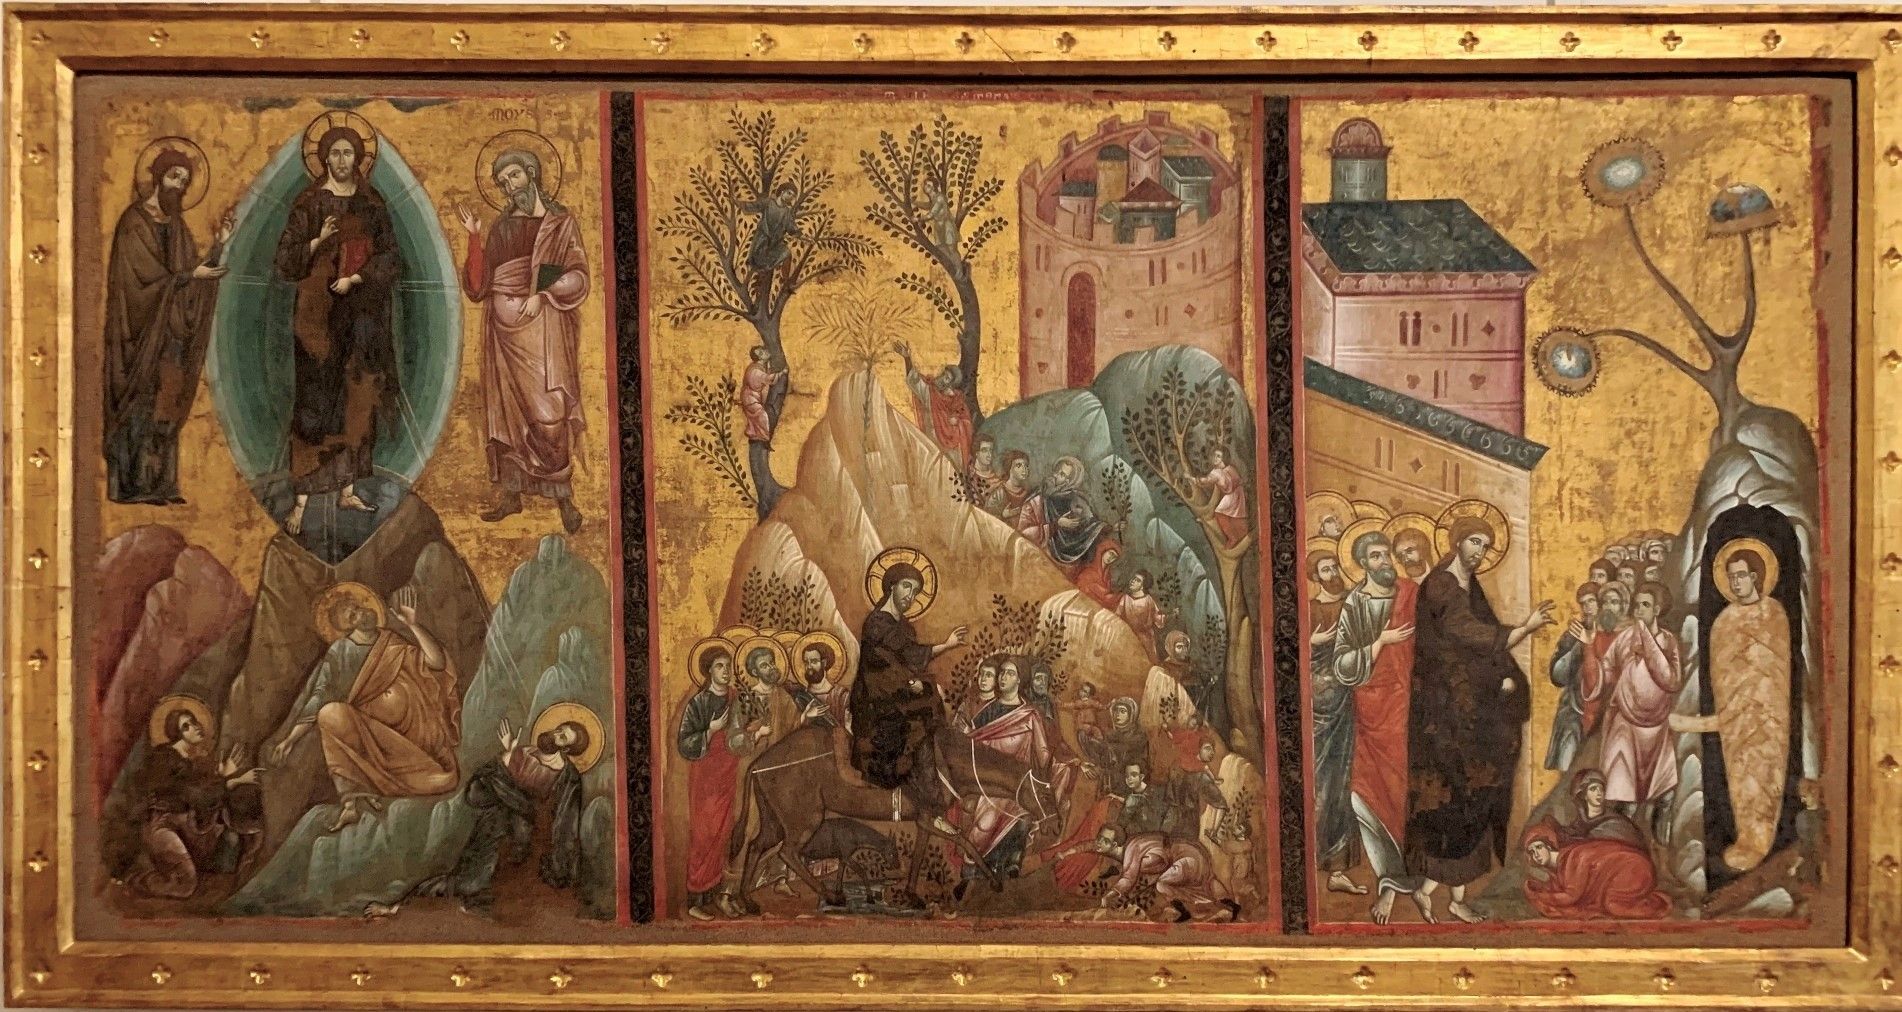 Guido de Siena, The Transifguration, the Entry into Jerusalem and the Raising of Lazarus